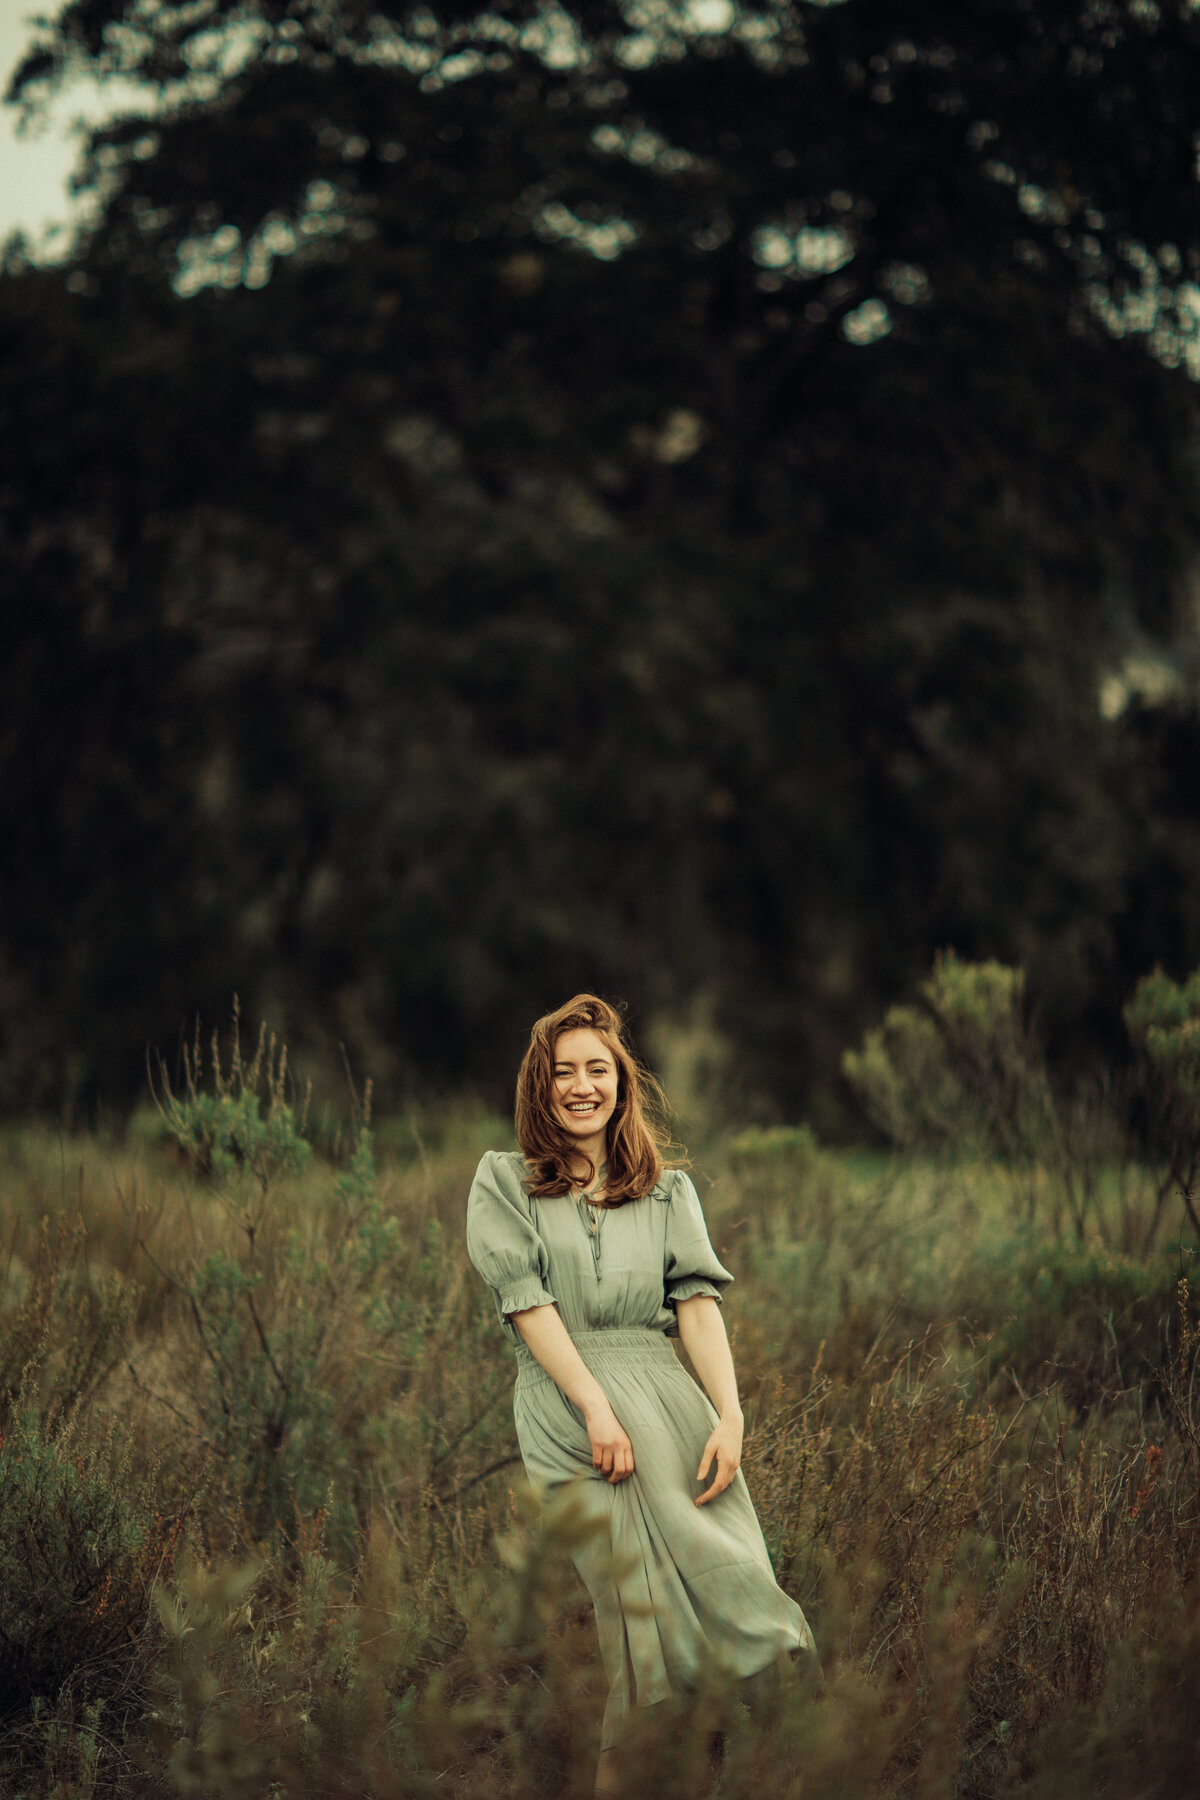 Portrait Photo Of Young Woman In Green Dress Smiling Los Angeles